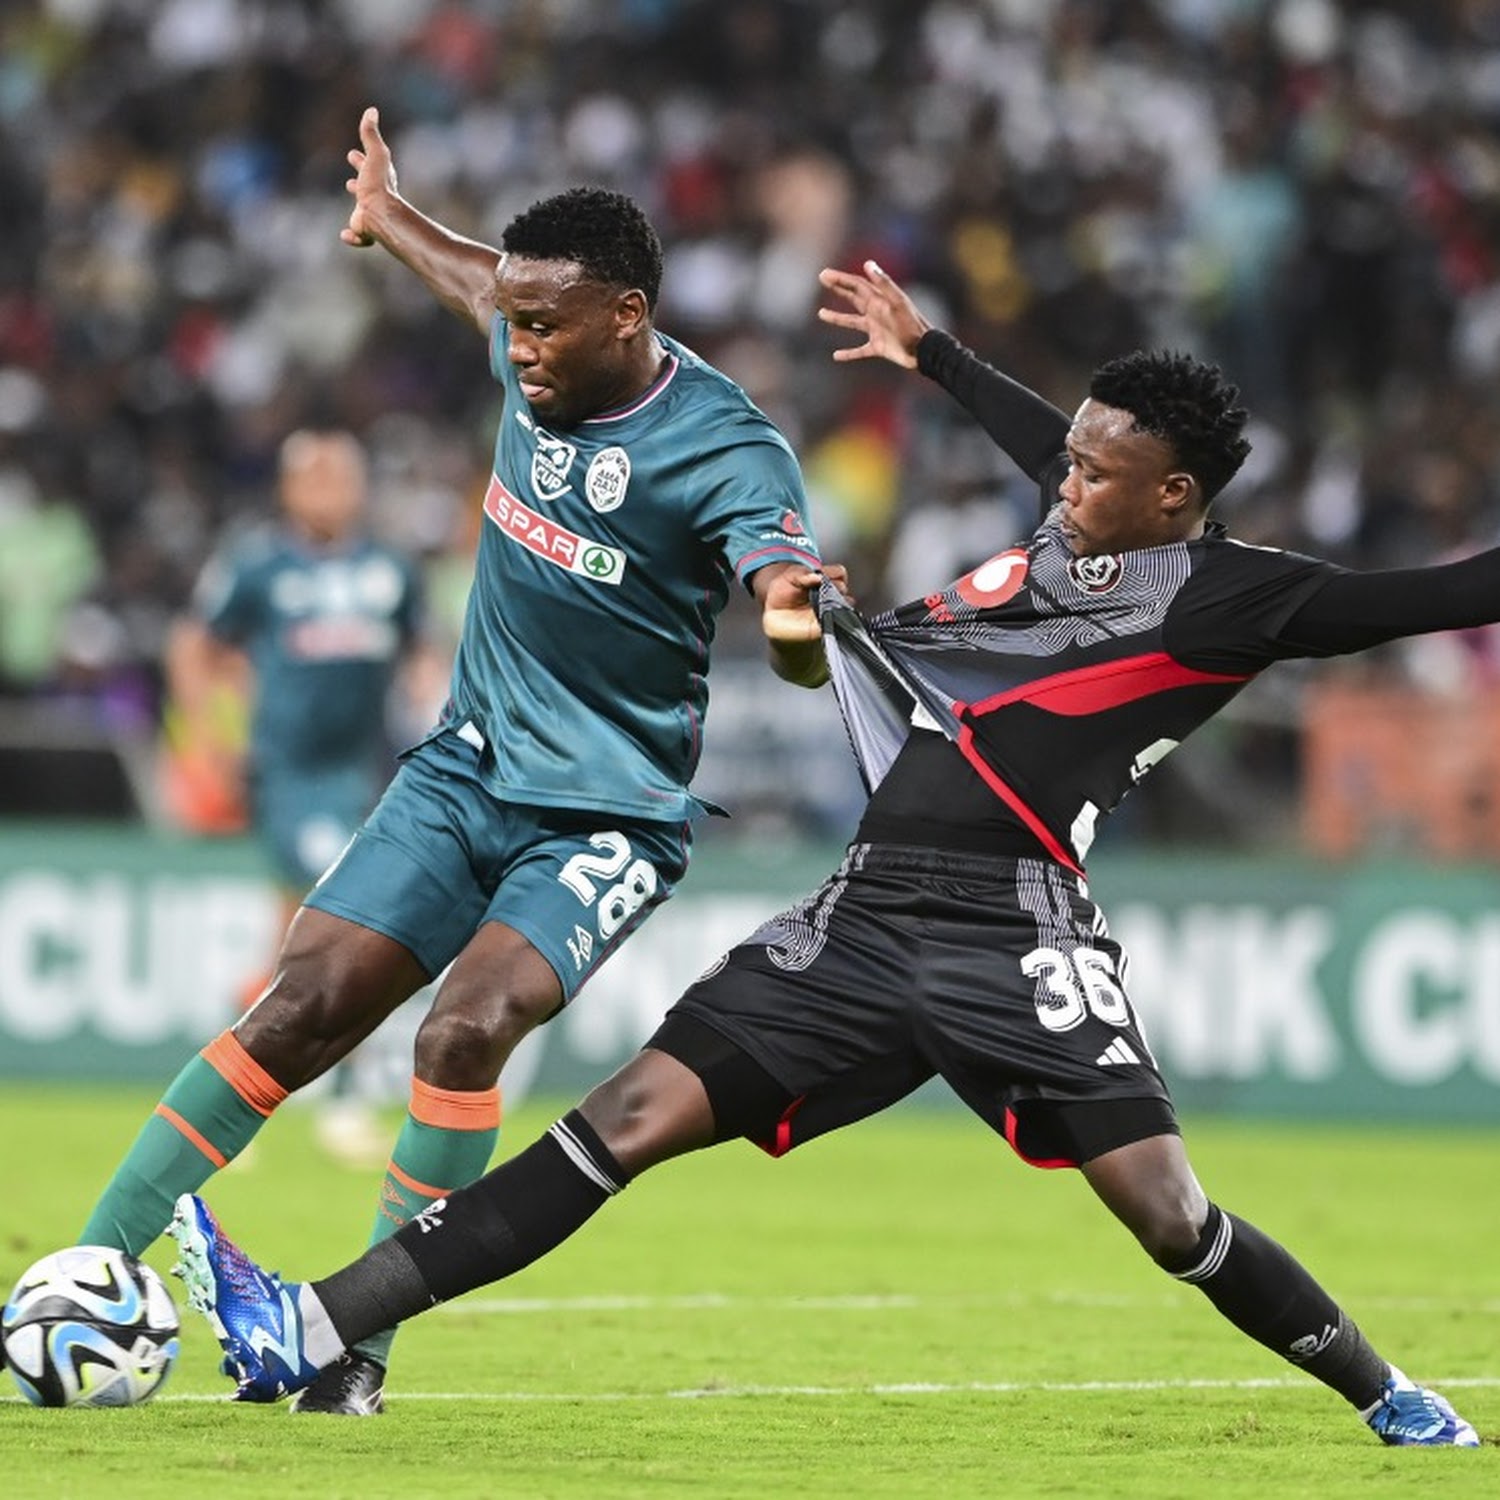 Furious AmaZulu coach Pablo Franco Martin criticizes officiating in Orlando Pirates loss as “a huge scandal, a disgrace for the country”.